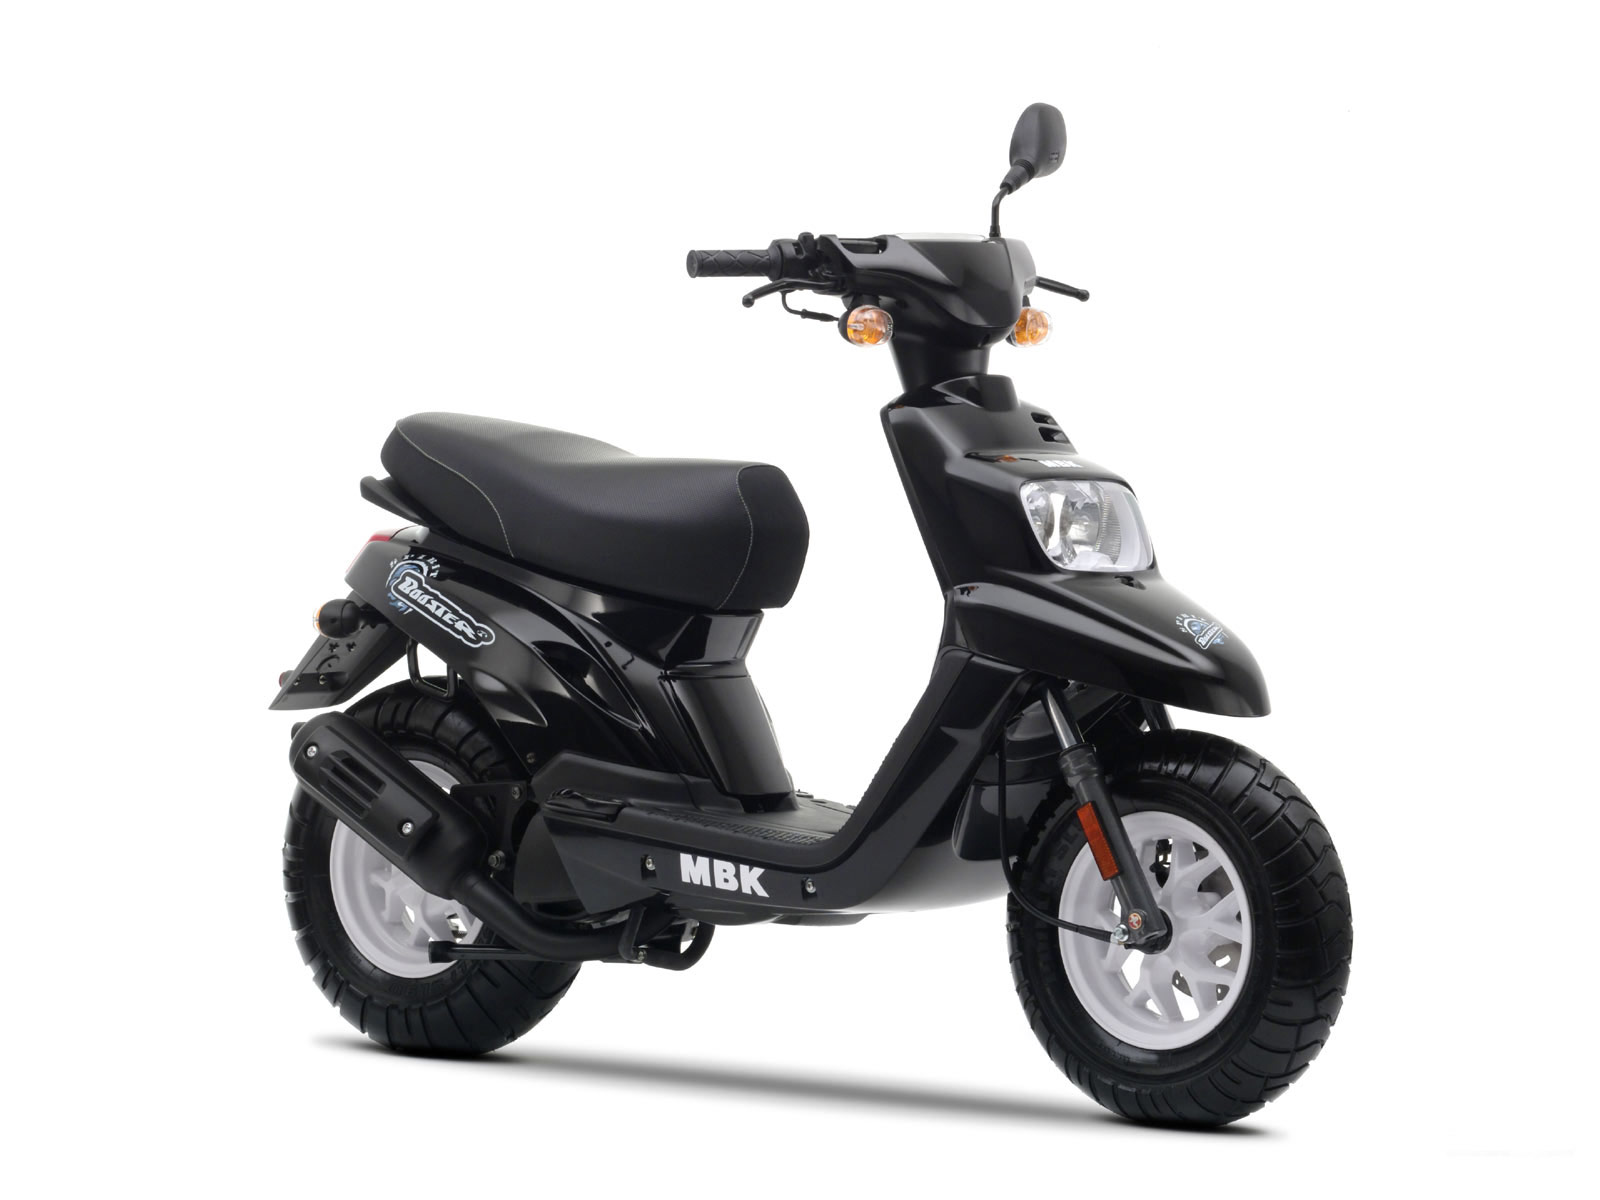 2008 MBK Booster Scooter picture, insurance information